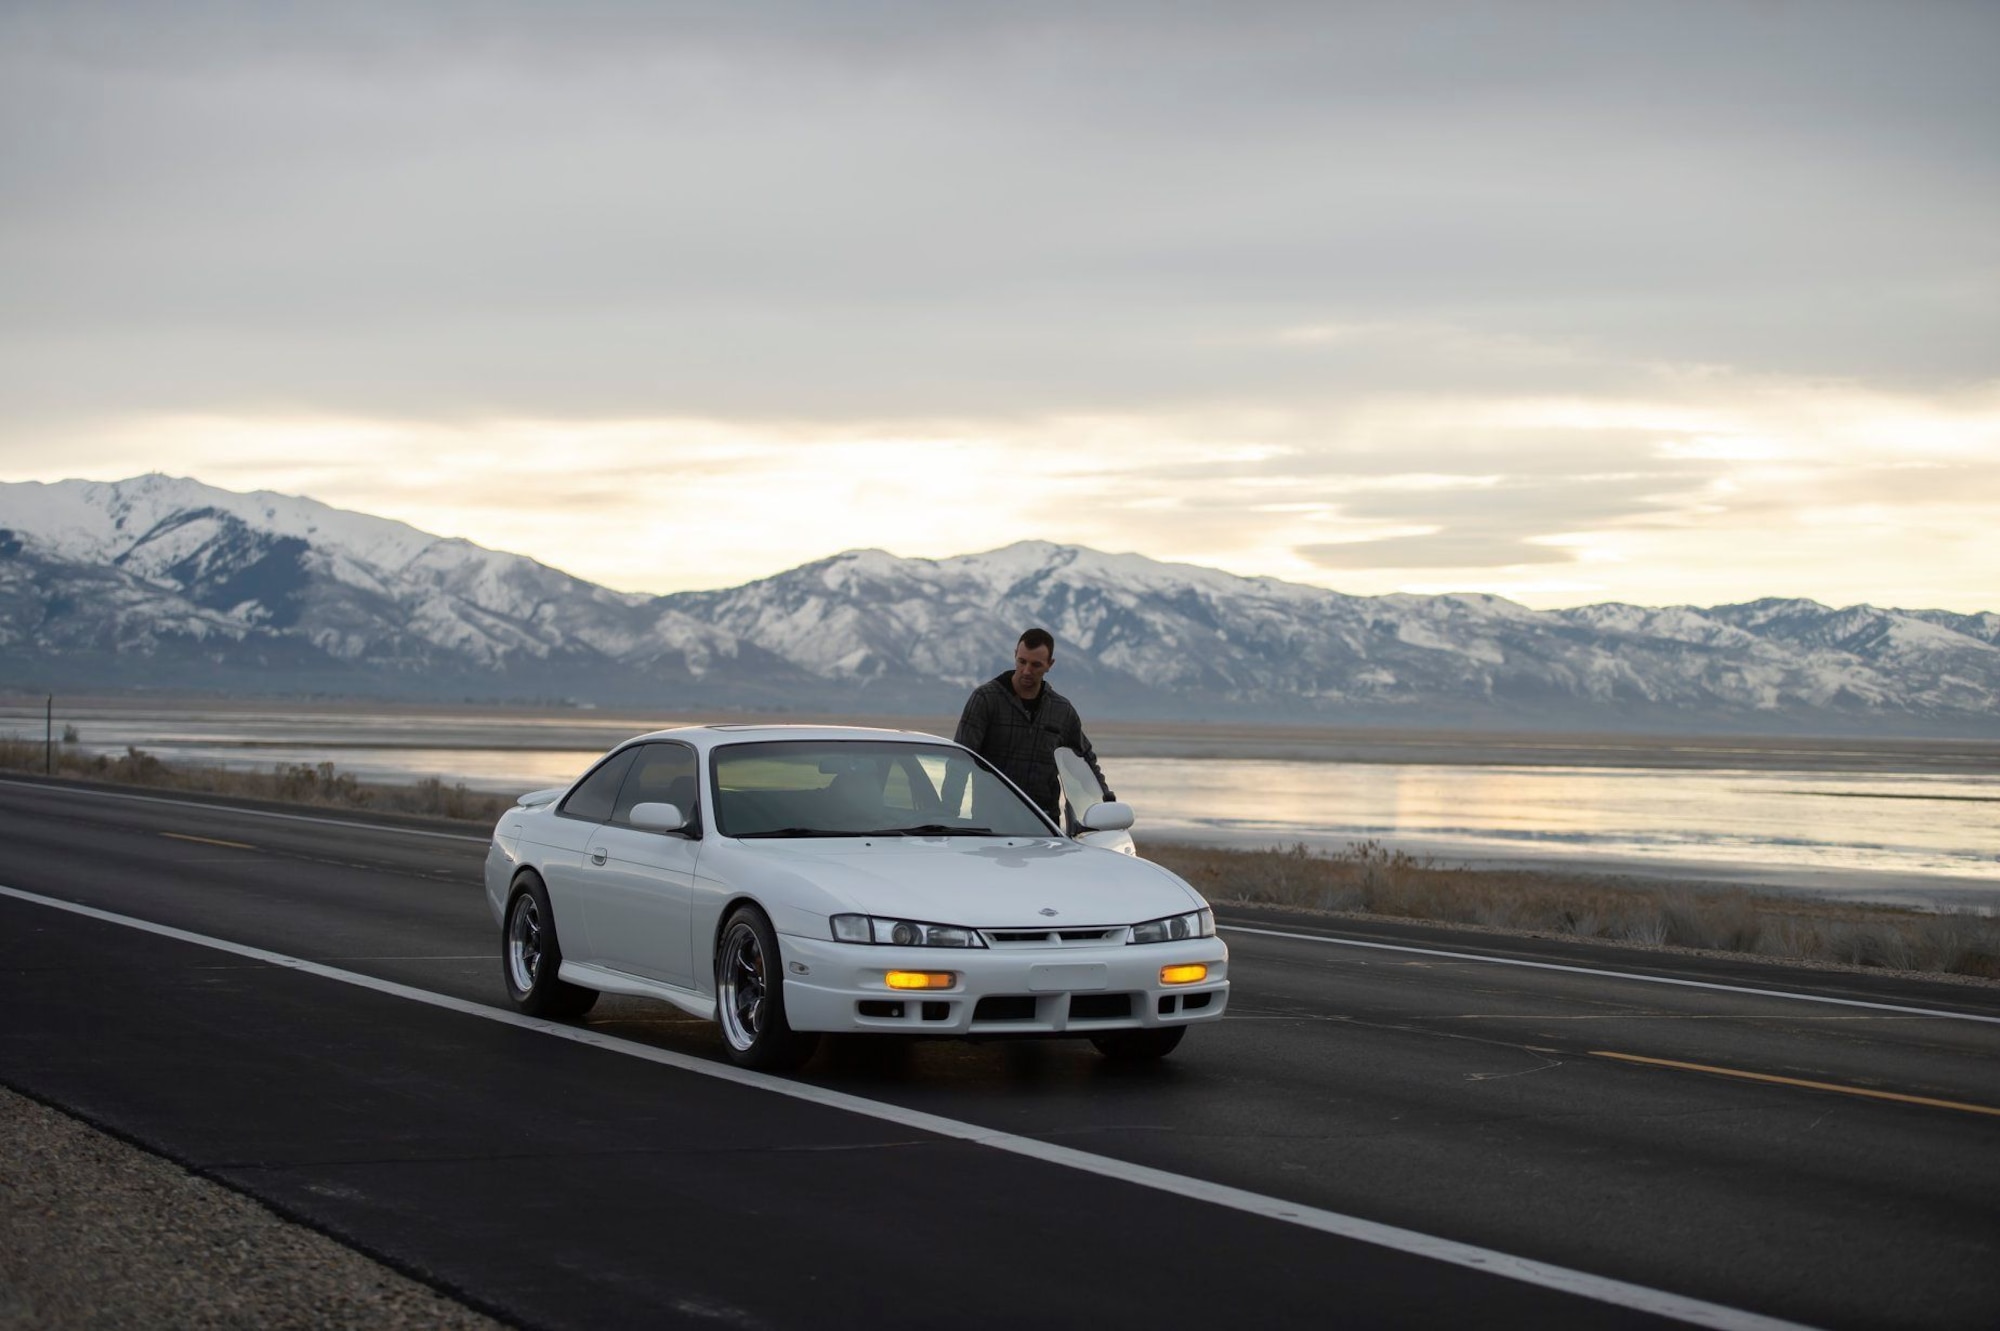 Staff Sgt. Brandon Bunn, a 388th Maintenance Group quality assurance inspector and car enthusiast, gets in his 1998 Nissan 240SX on Antelope Island, Utah, Feb. 2, 2020. His 240SX has a 2JZ-GTE engine from the fourth-generation Toyota Supra and gets more than 500 horsepower to the wheels, reliably. (U.S. Air Force photo by Staff Sgt. Jarrod M. Vickers)